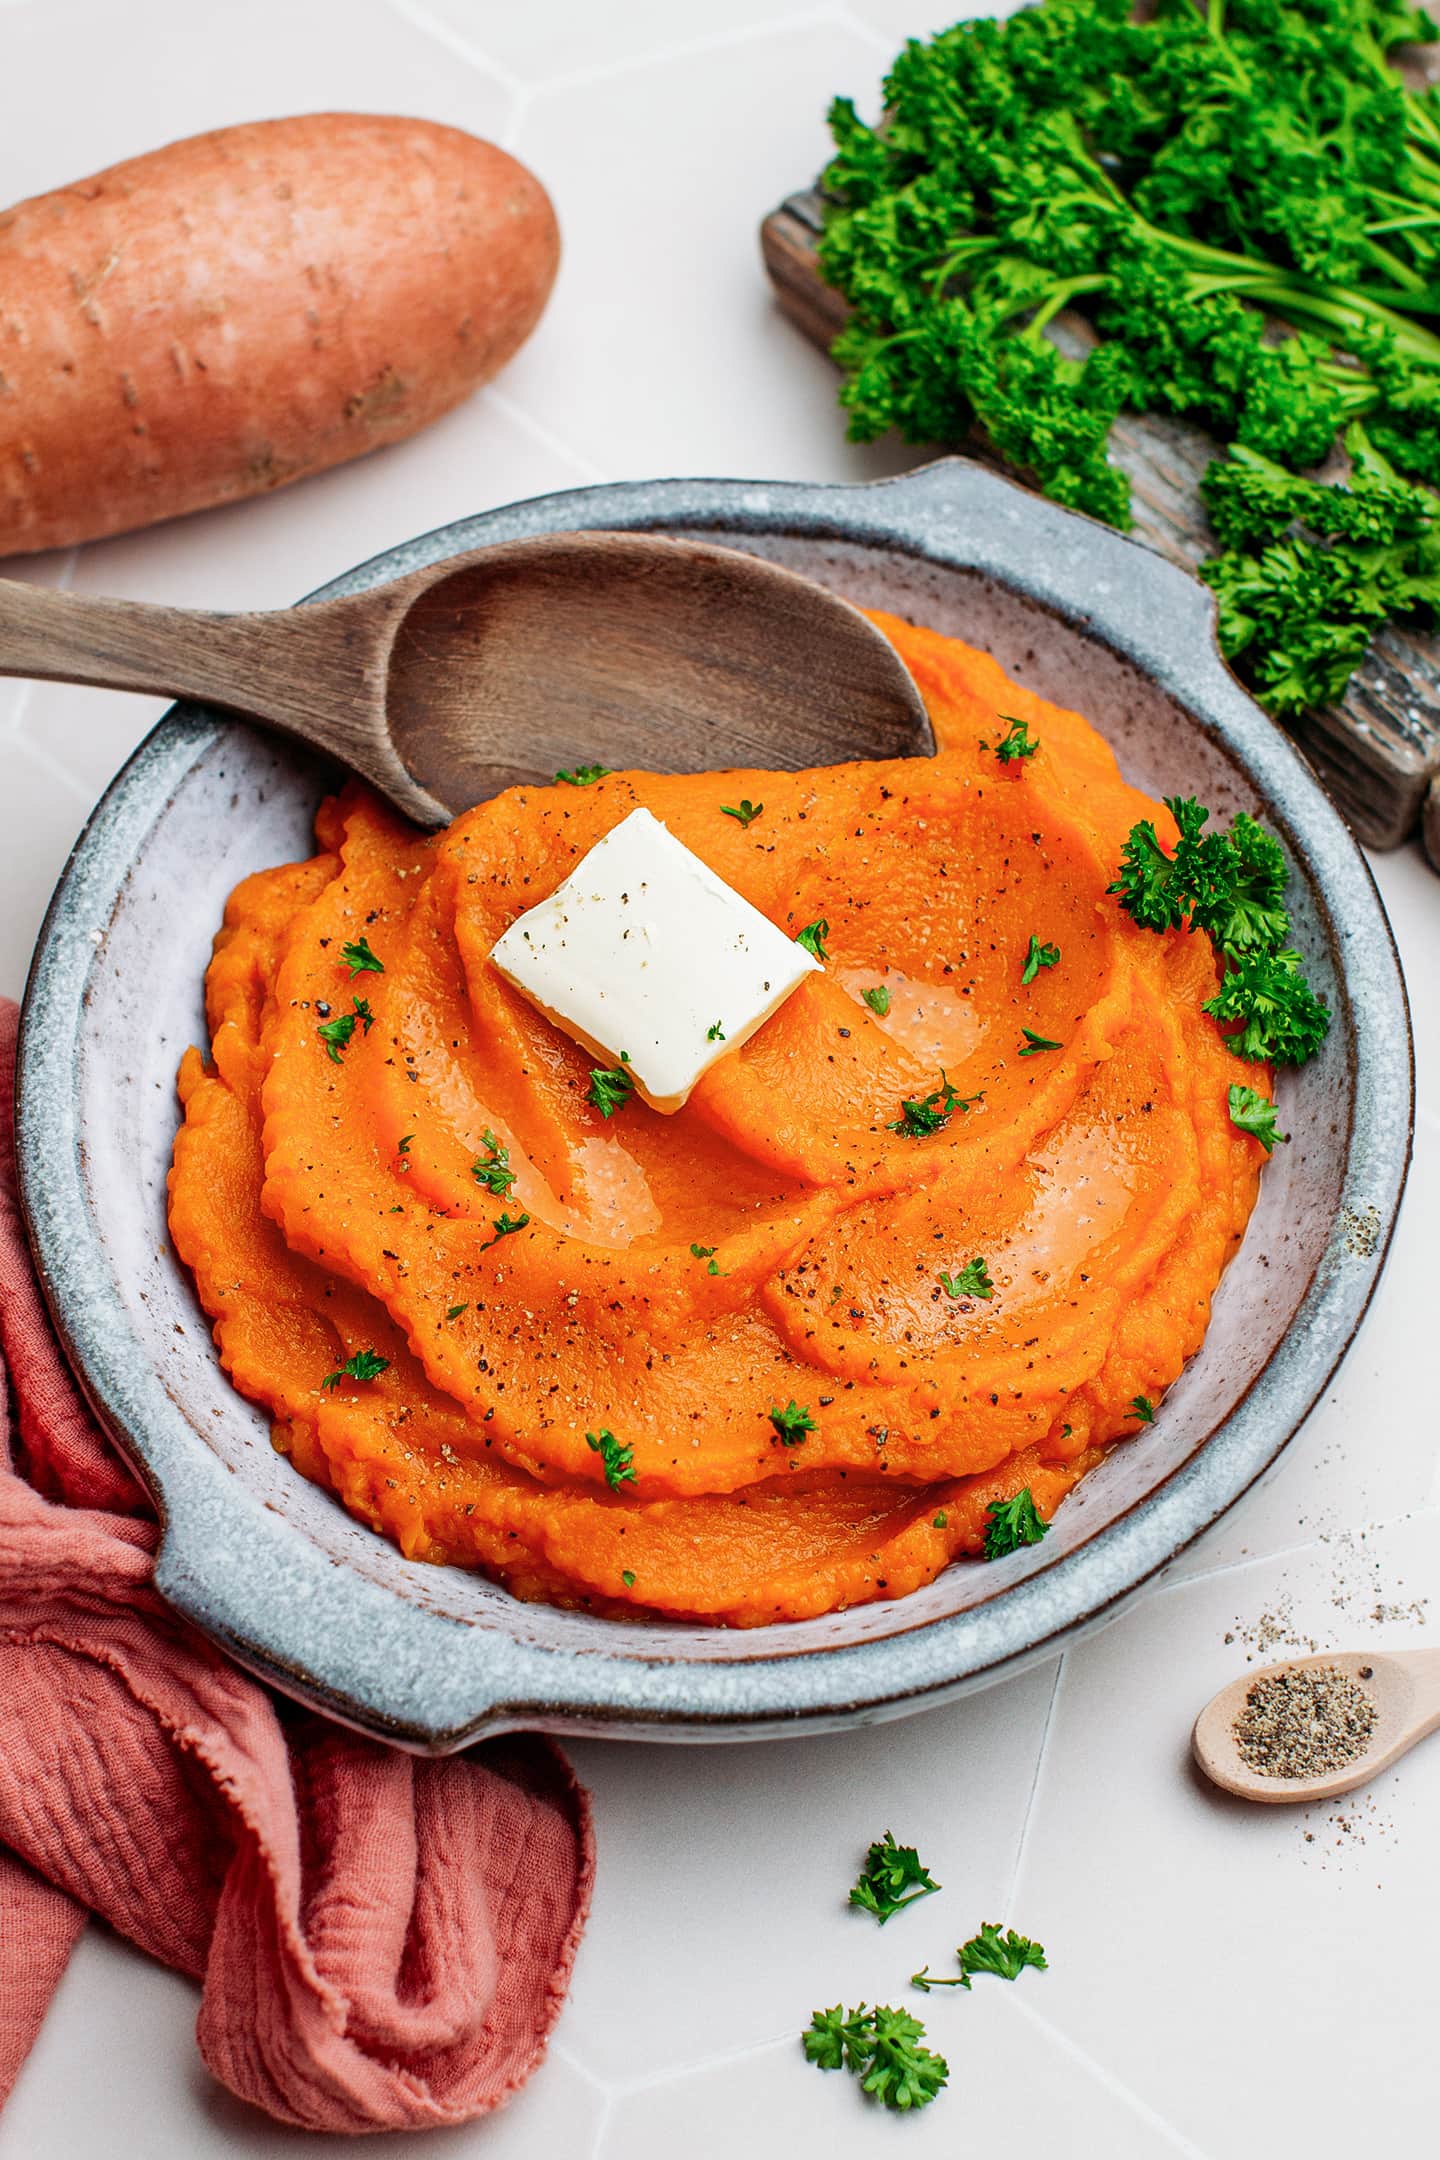 Mashed sweet potatoes in a serving plate.